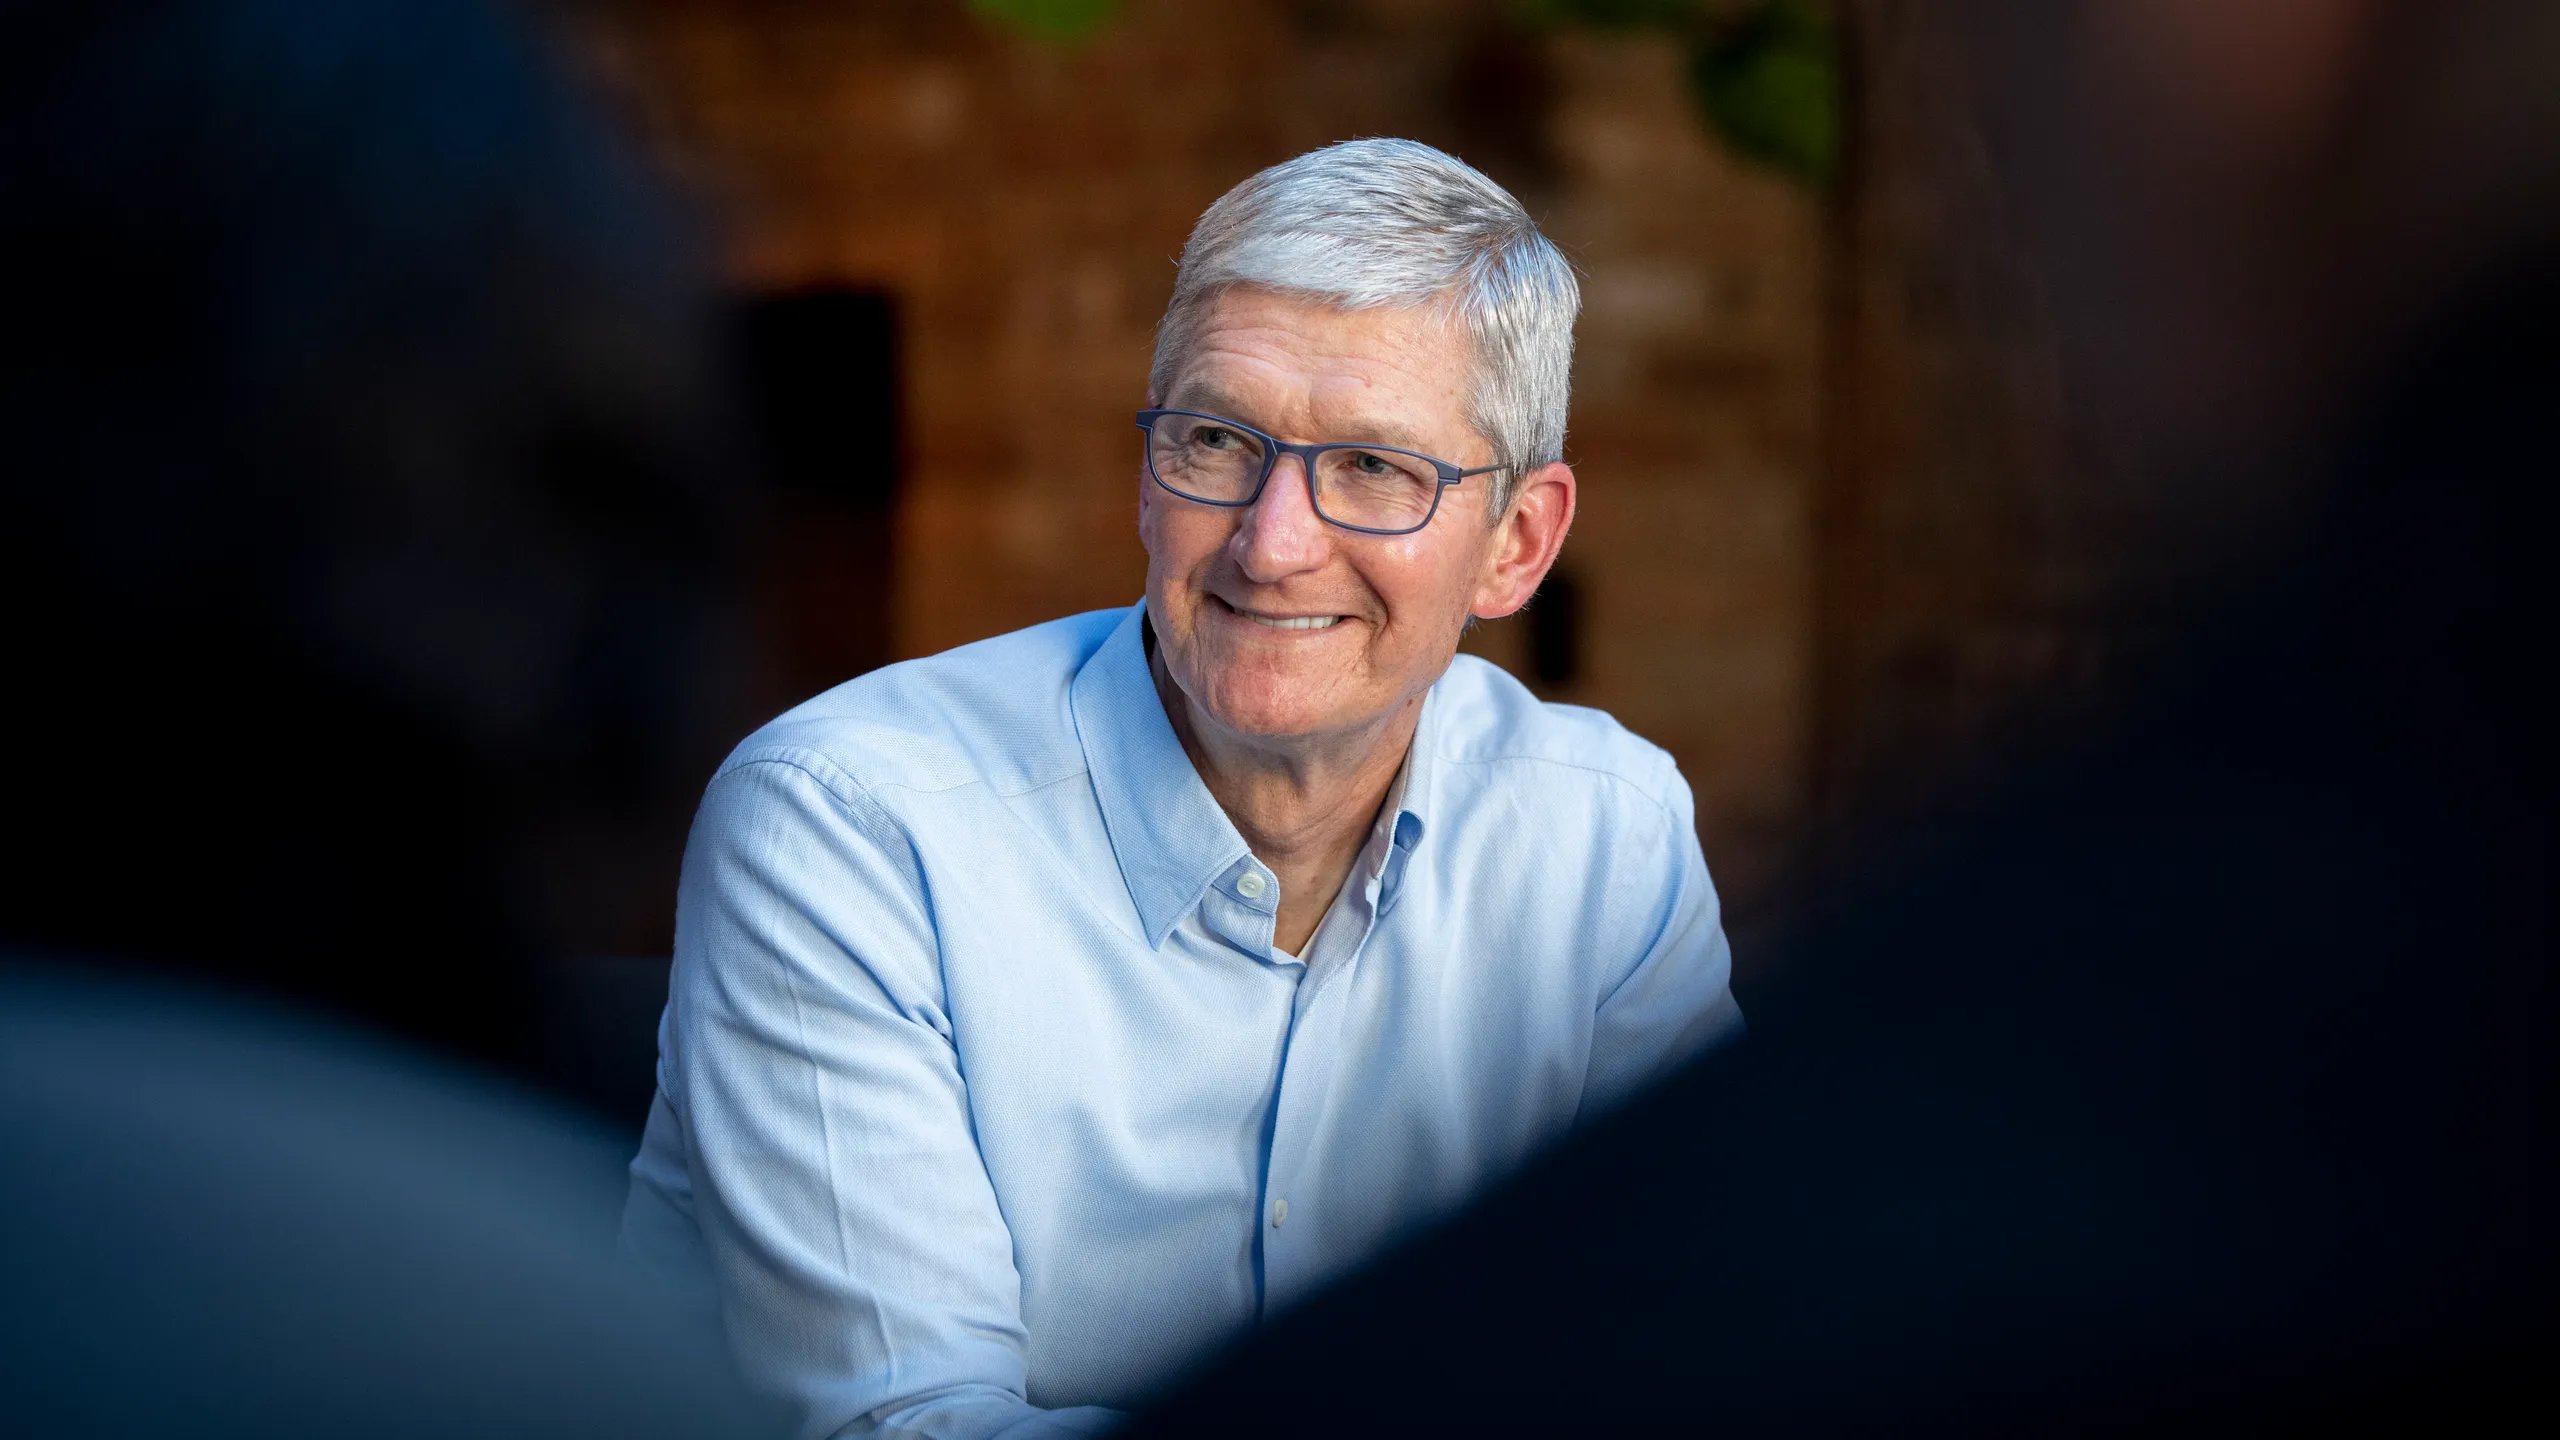 apple-aims-to-make-iphones-entirely-using-recycled-materials-tim-cook